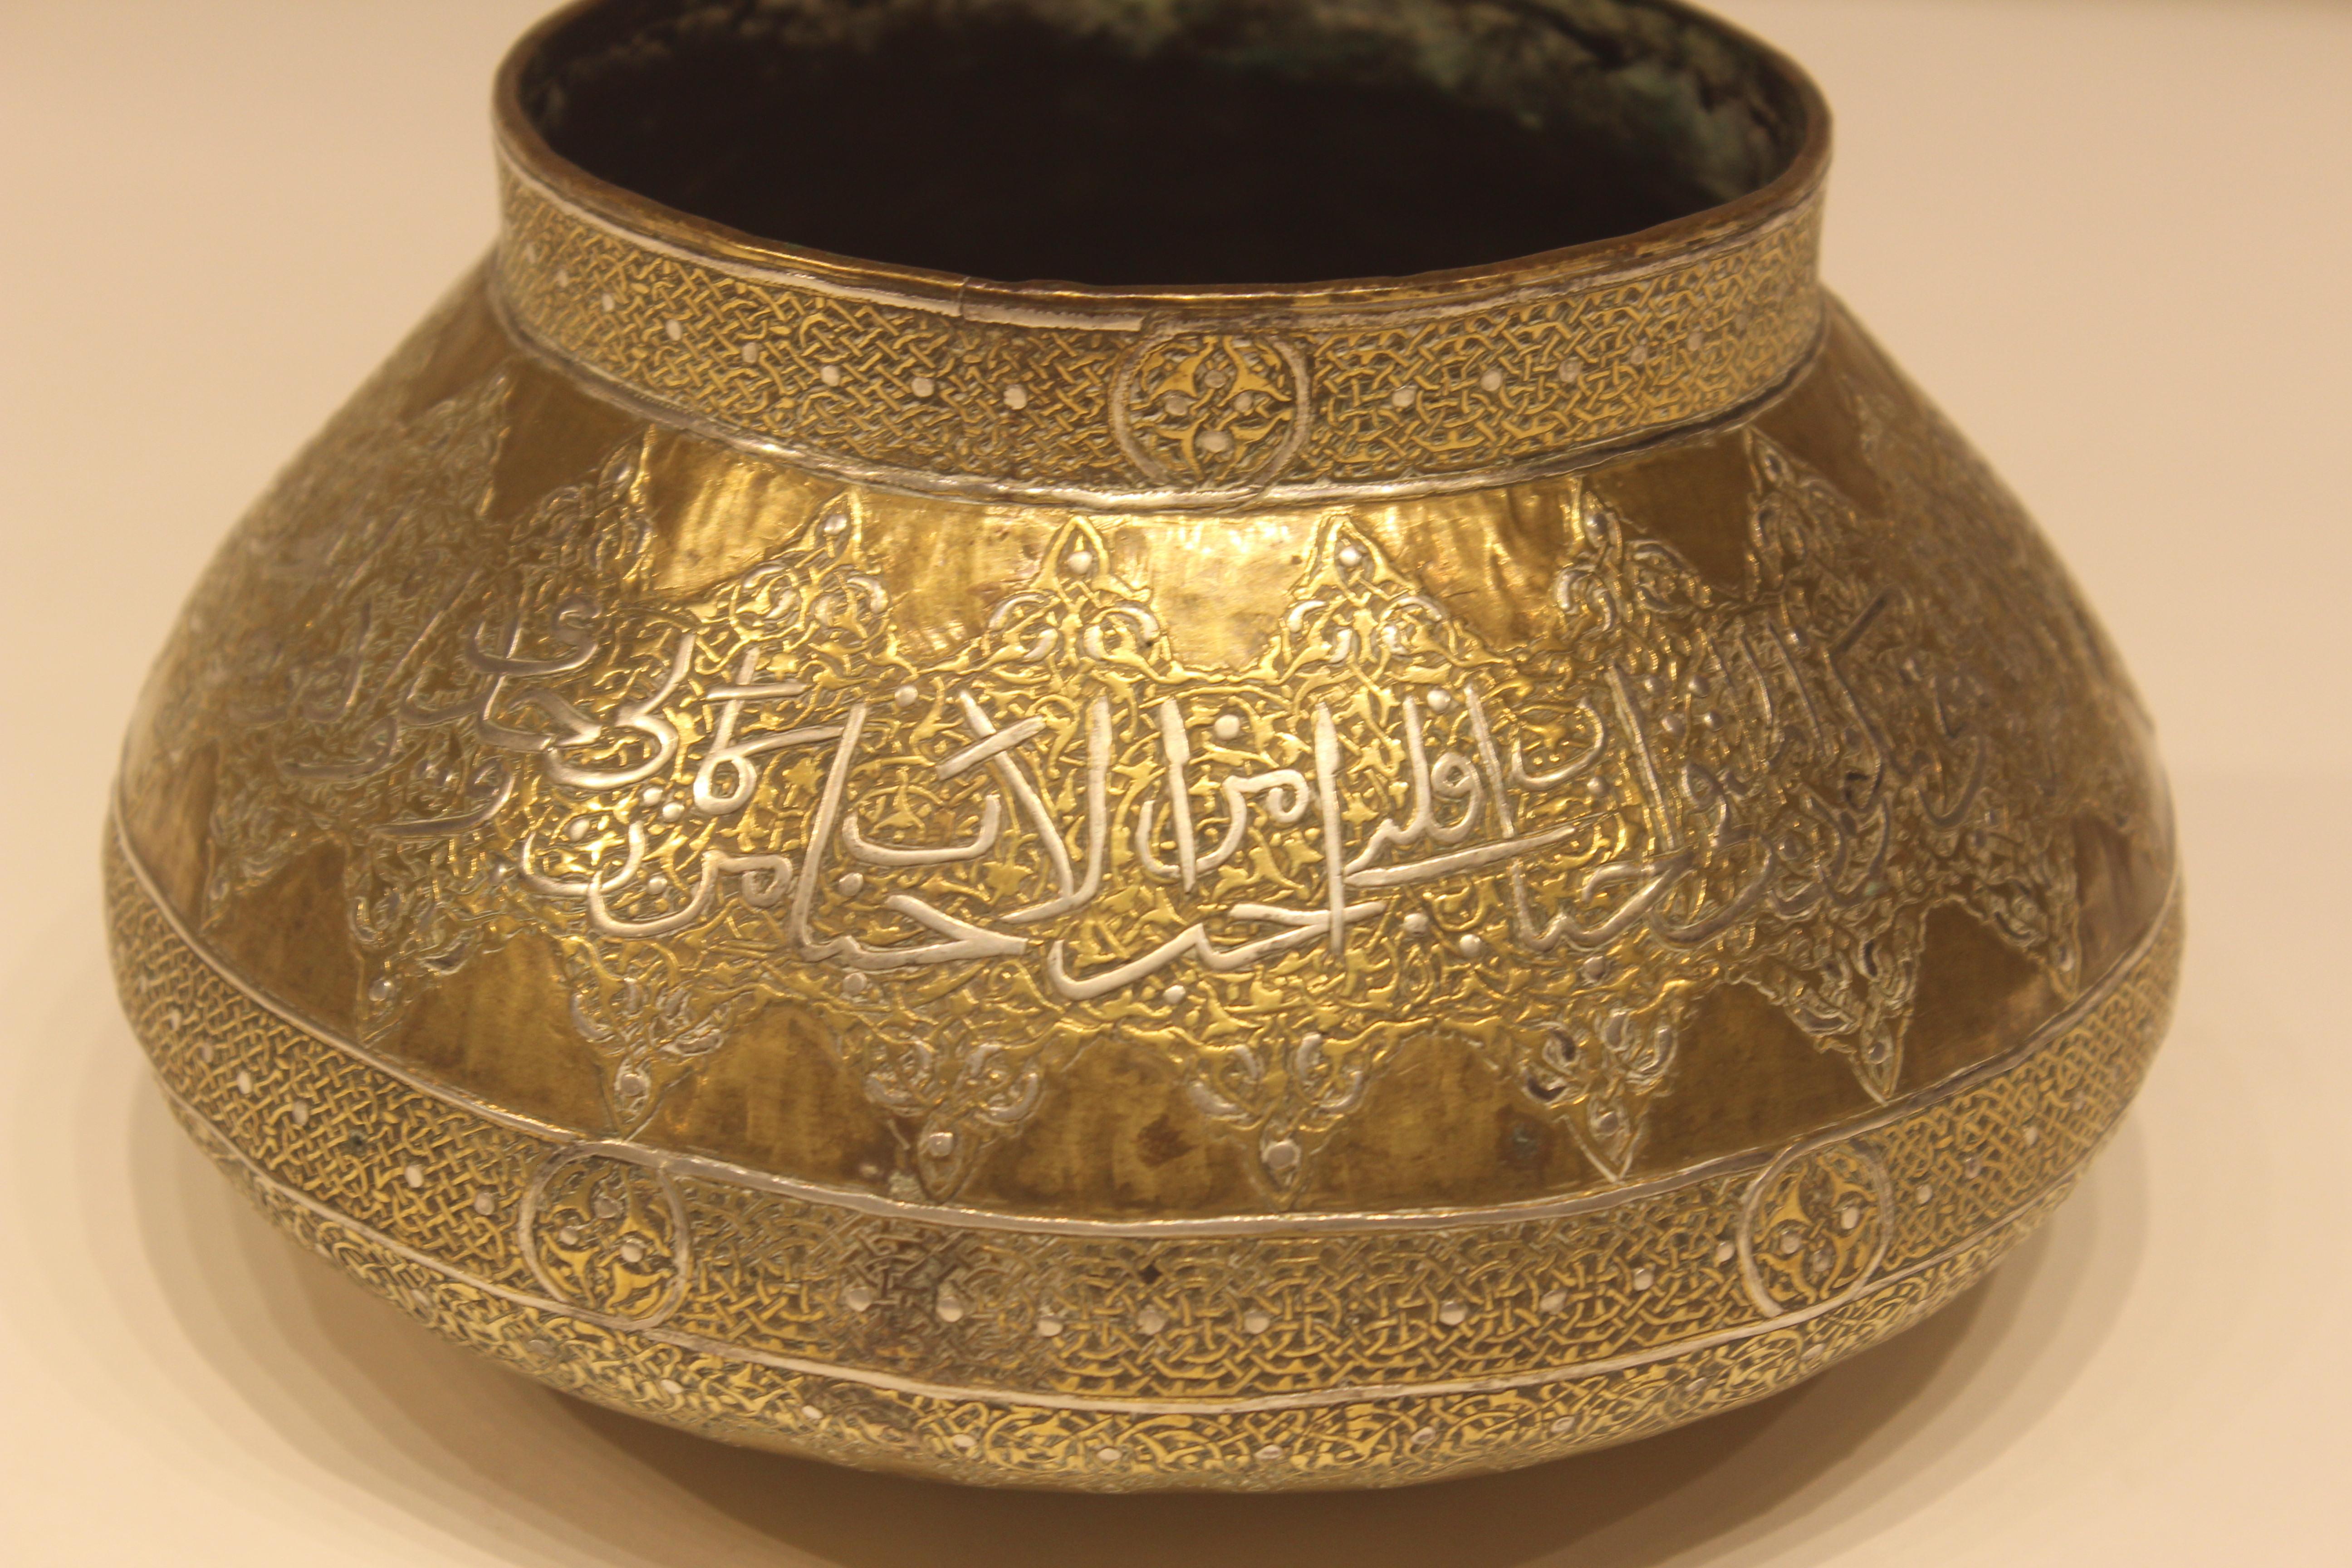 Mid-19th century unusual Mamluk brass filigree bowl. Inlayed silver Arabic filigree surrounding the surface of pot with great detail. Done by hand and signed at bottom.